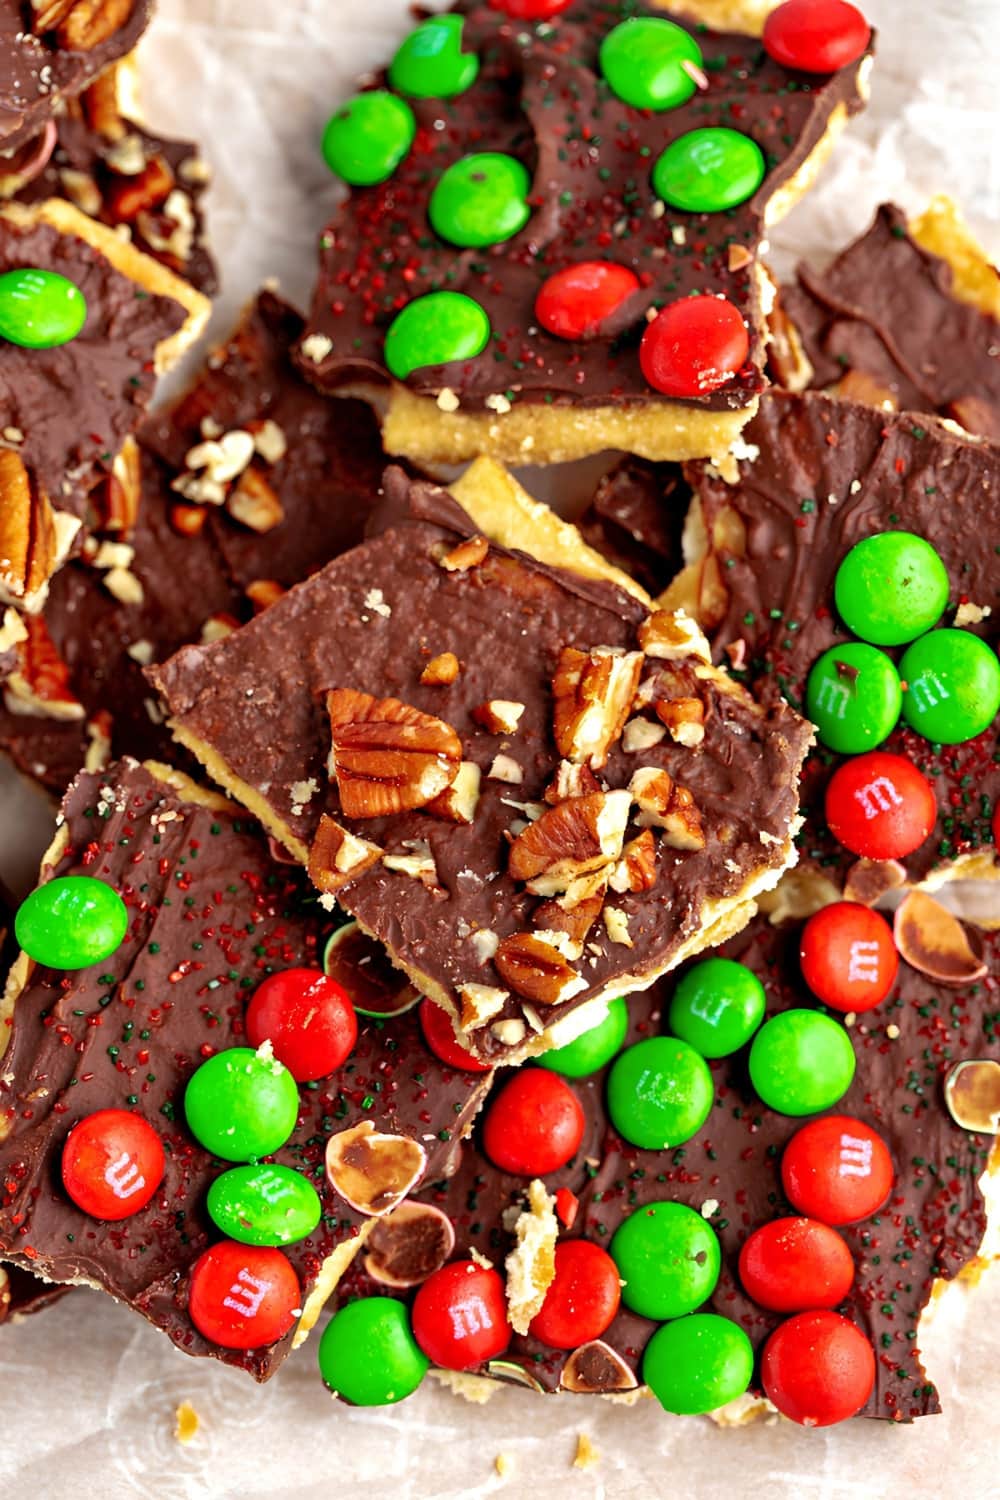 Top view of Christmas crack covered in chocolate and topped with pecan nuts and M&M's candies. 